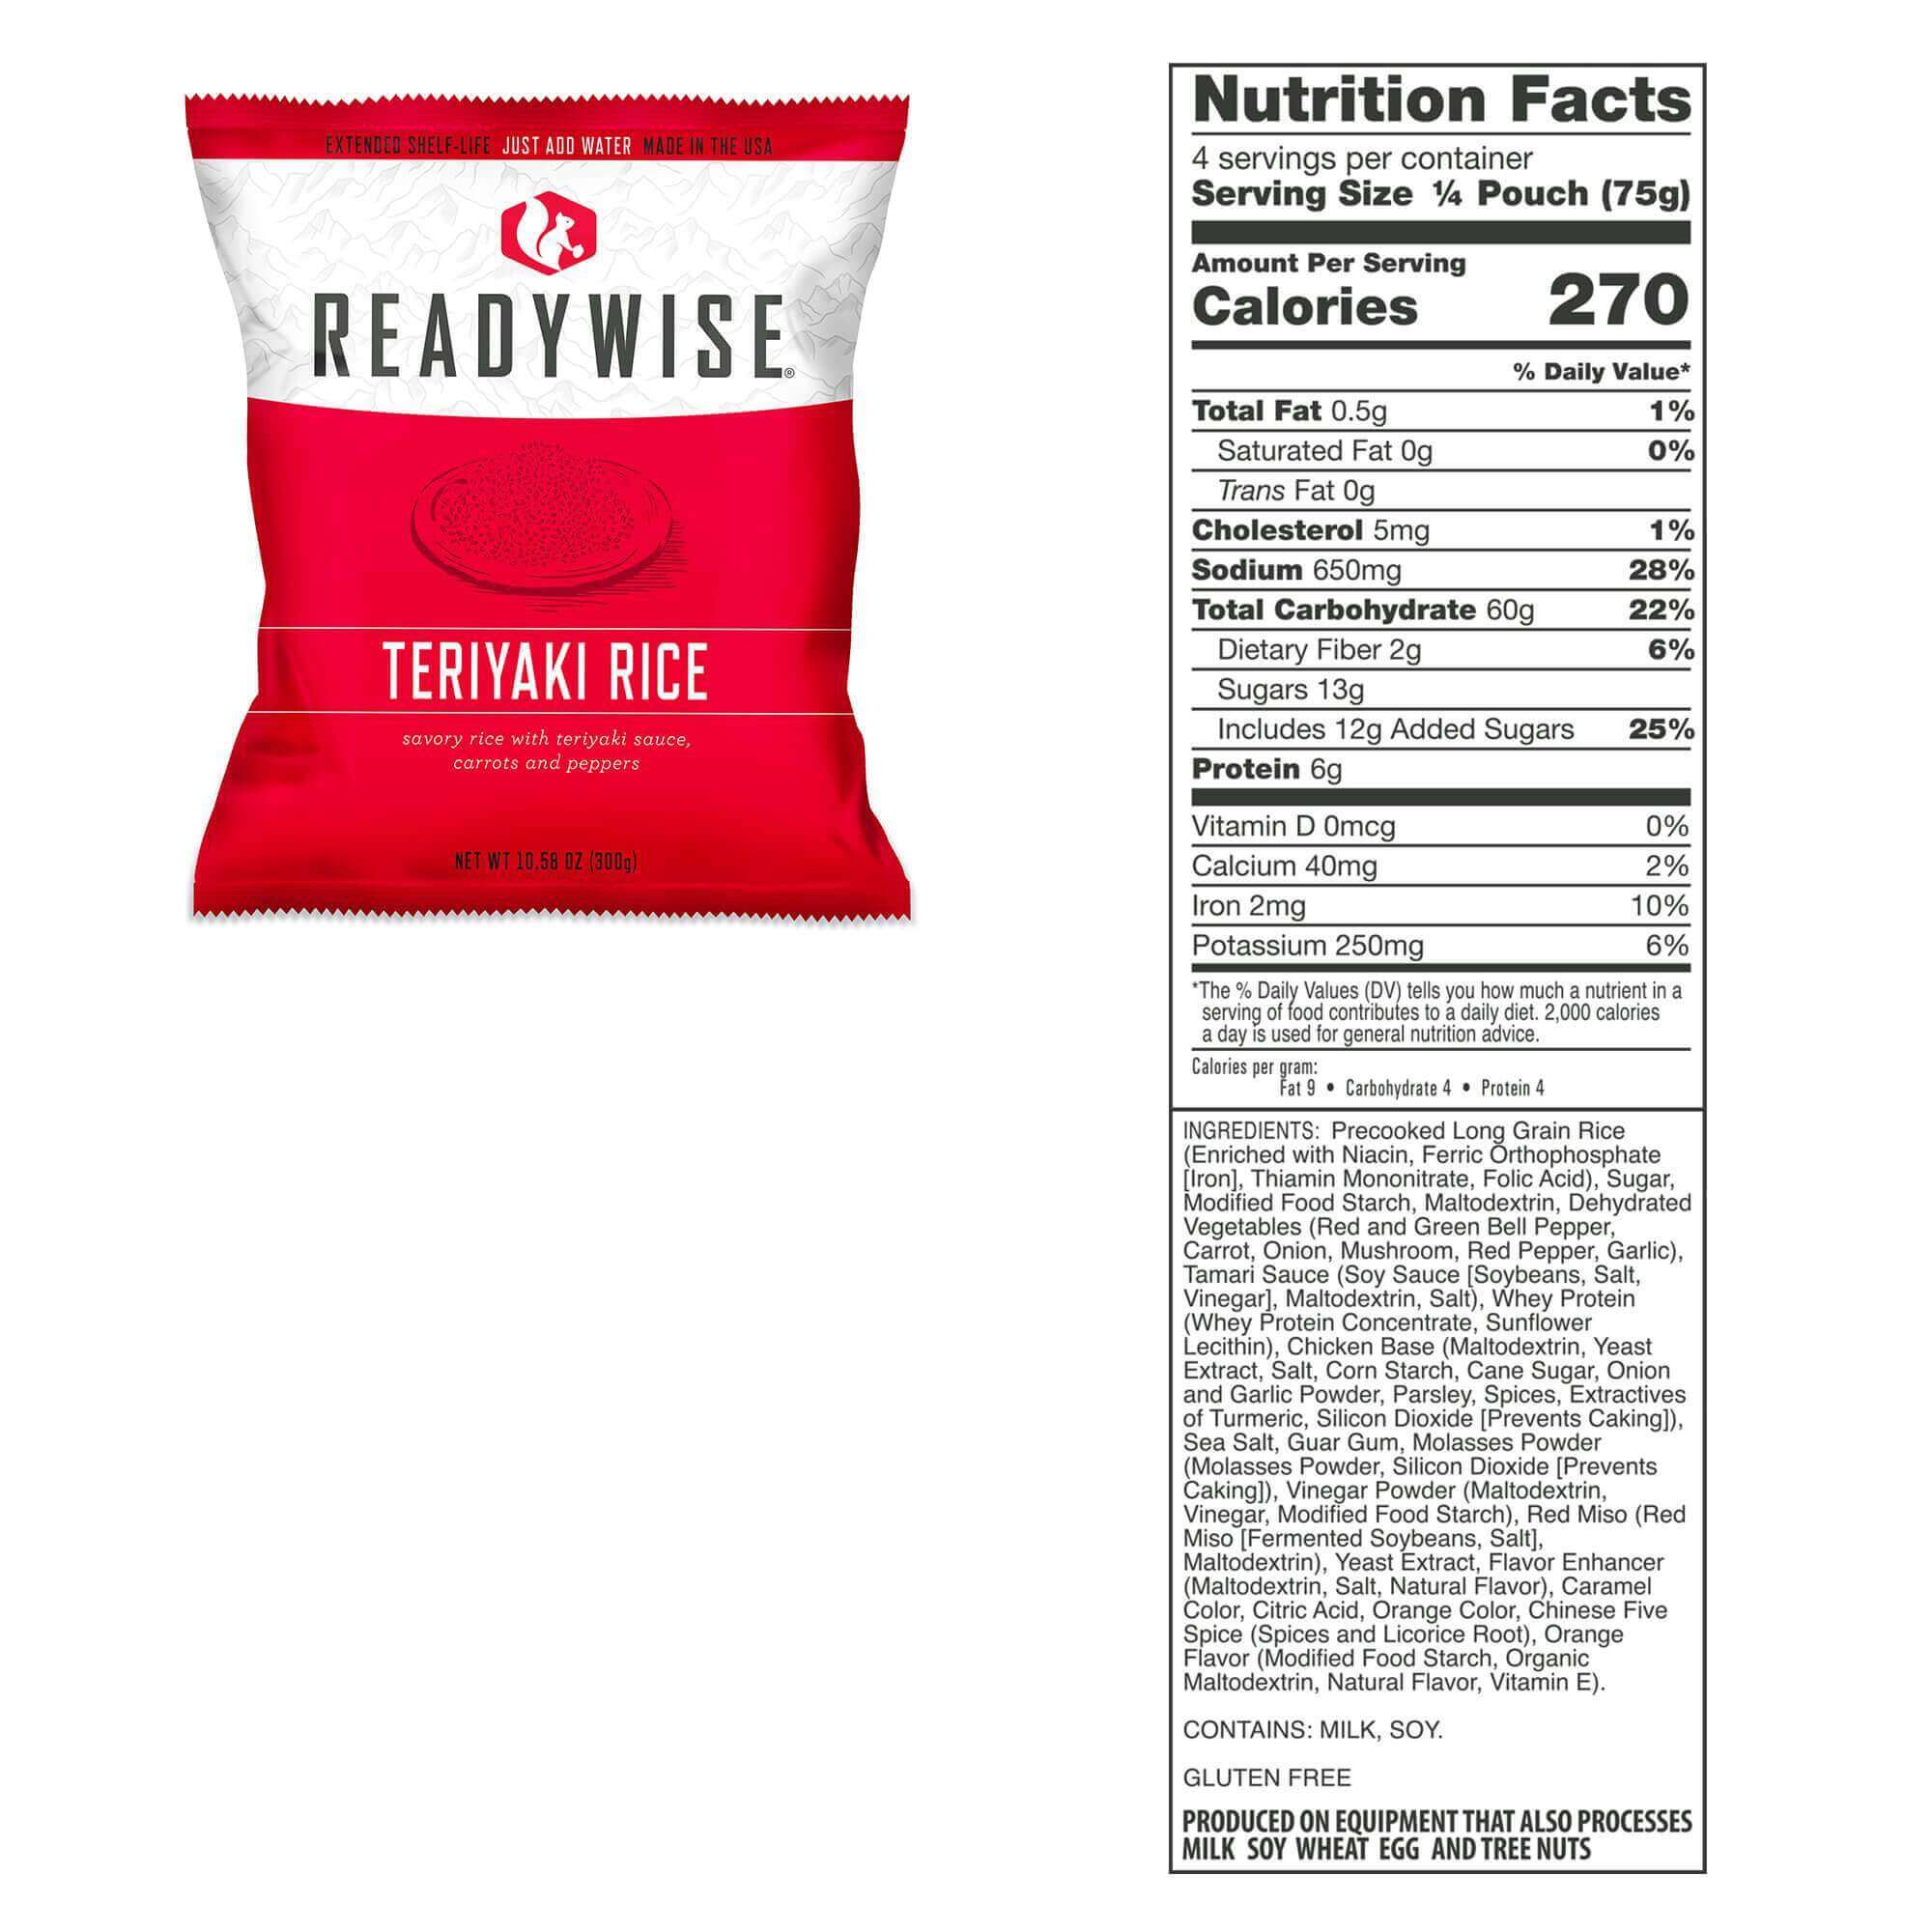 ReadyWise (formerly Wise Food Storage) 240 Serving Package - 40 lbs - Includes 1 - 120 Serving Entree Bucket and 1 - 120 Serving Breakfast Bucket (SHIPS IN 1-2 WEEKS) readywise readywise readywise readywise readywise readywise readywise readywise readywise